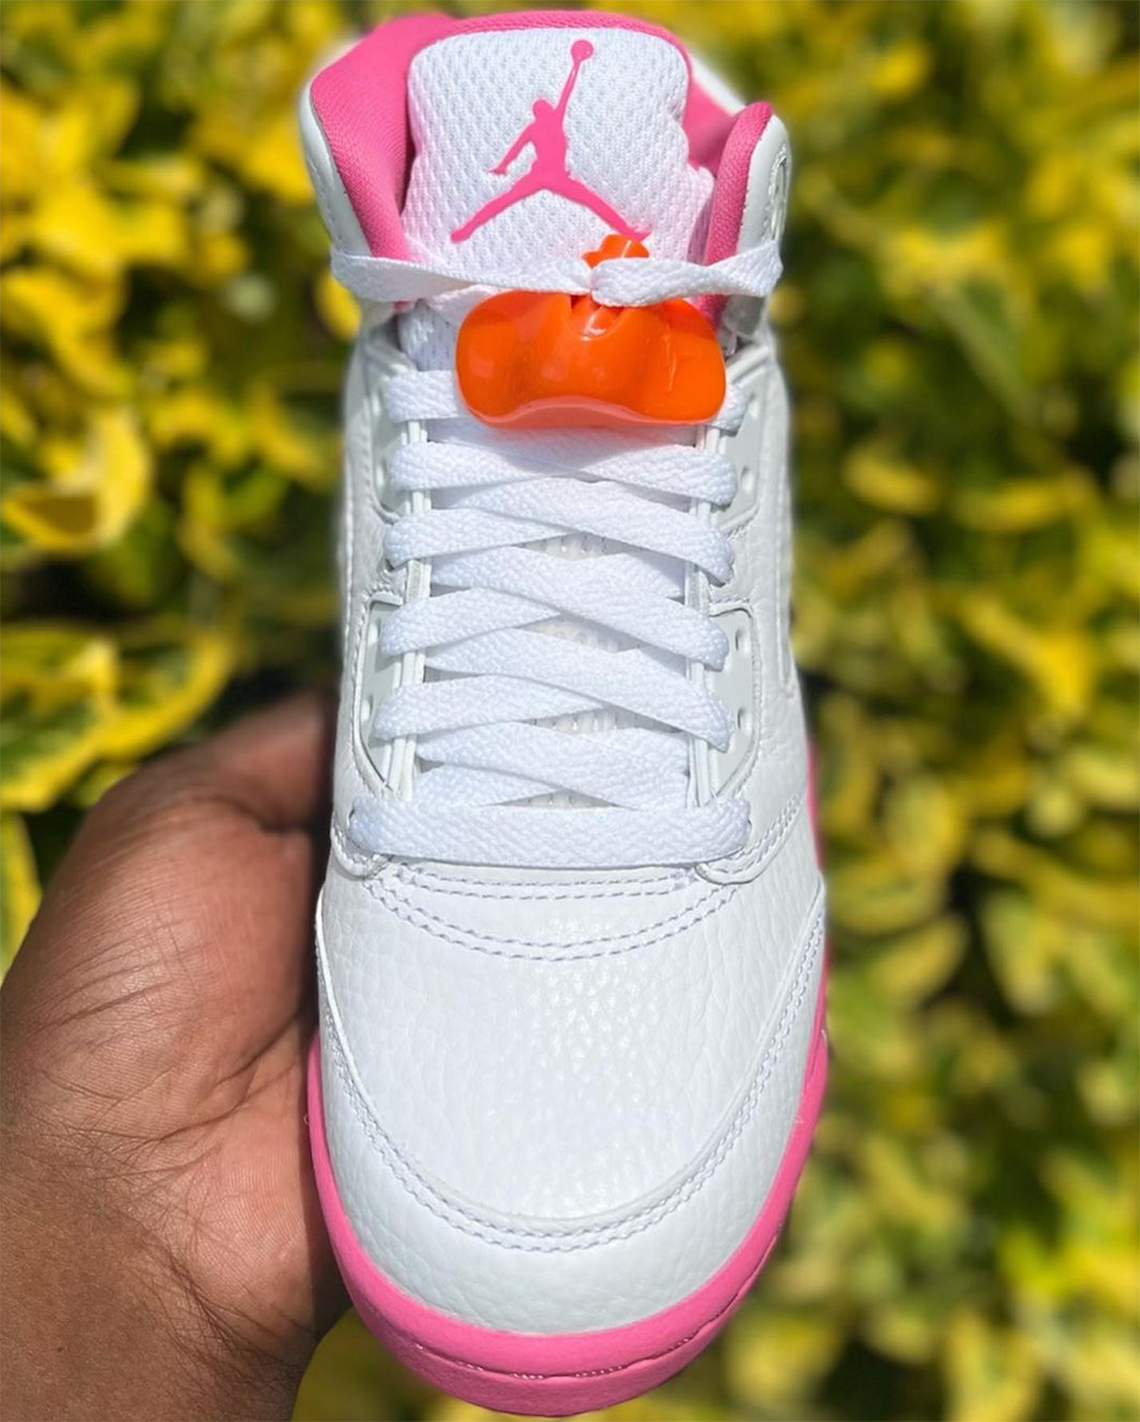 all white and pink jordans